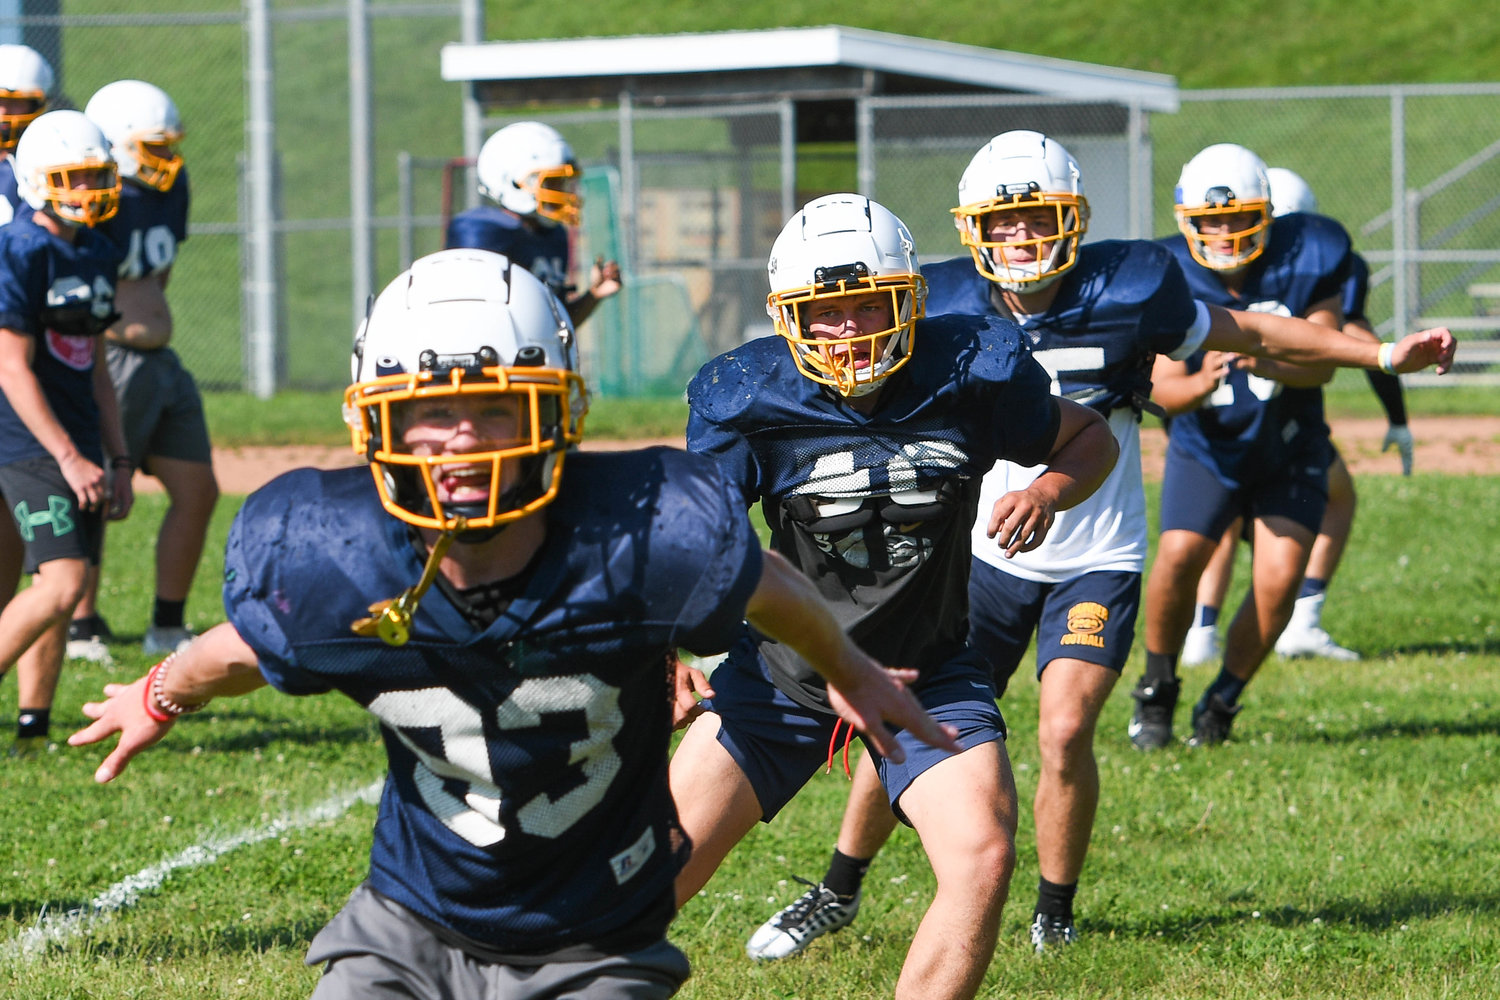 Central Valley Academy players warm up during an afternoon practice on Aug. 24 in Ilion.